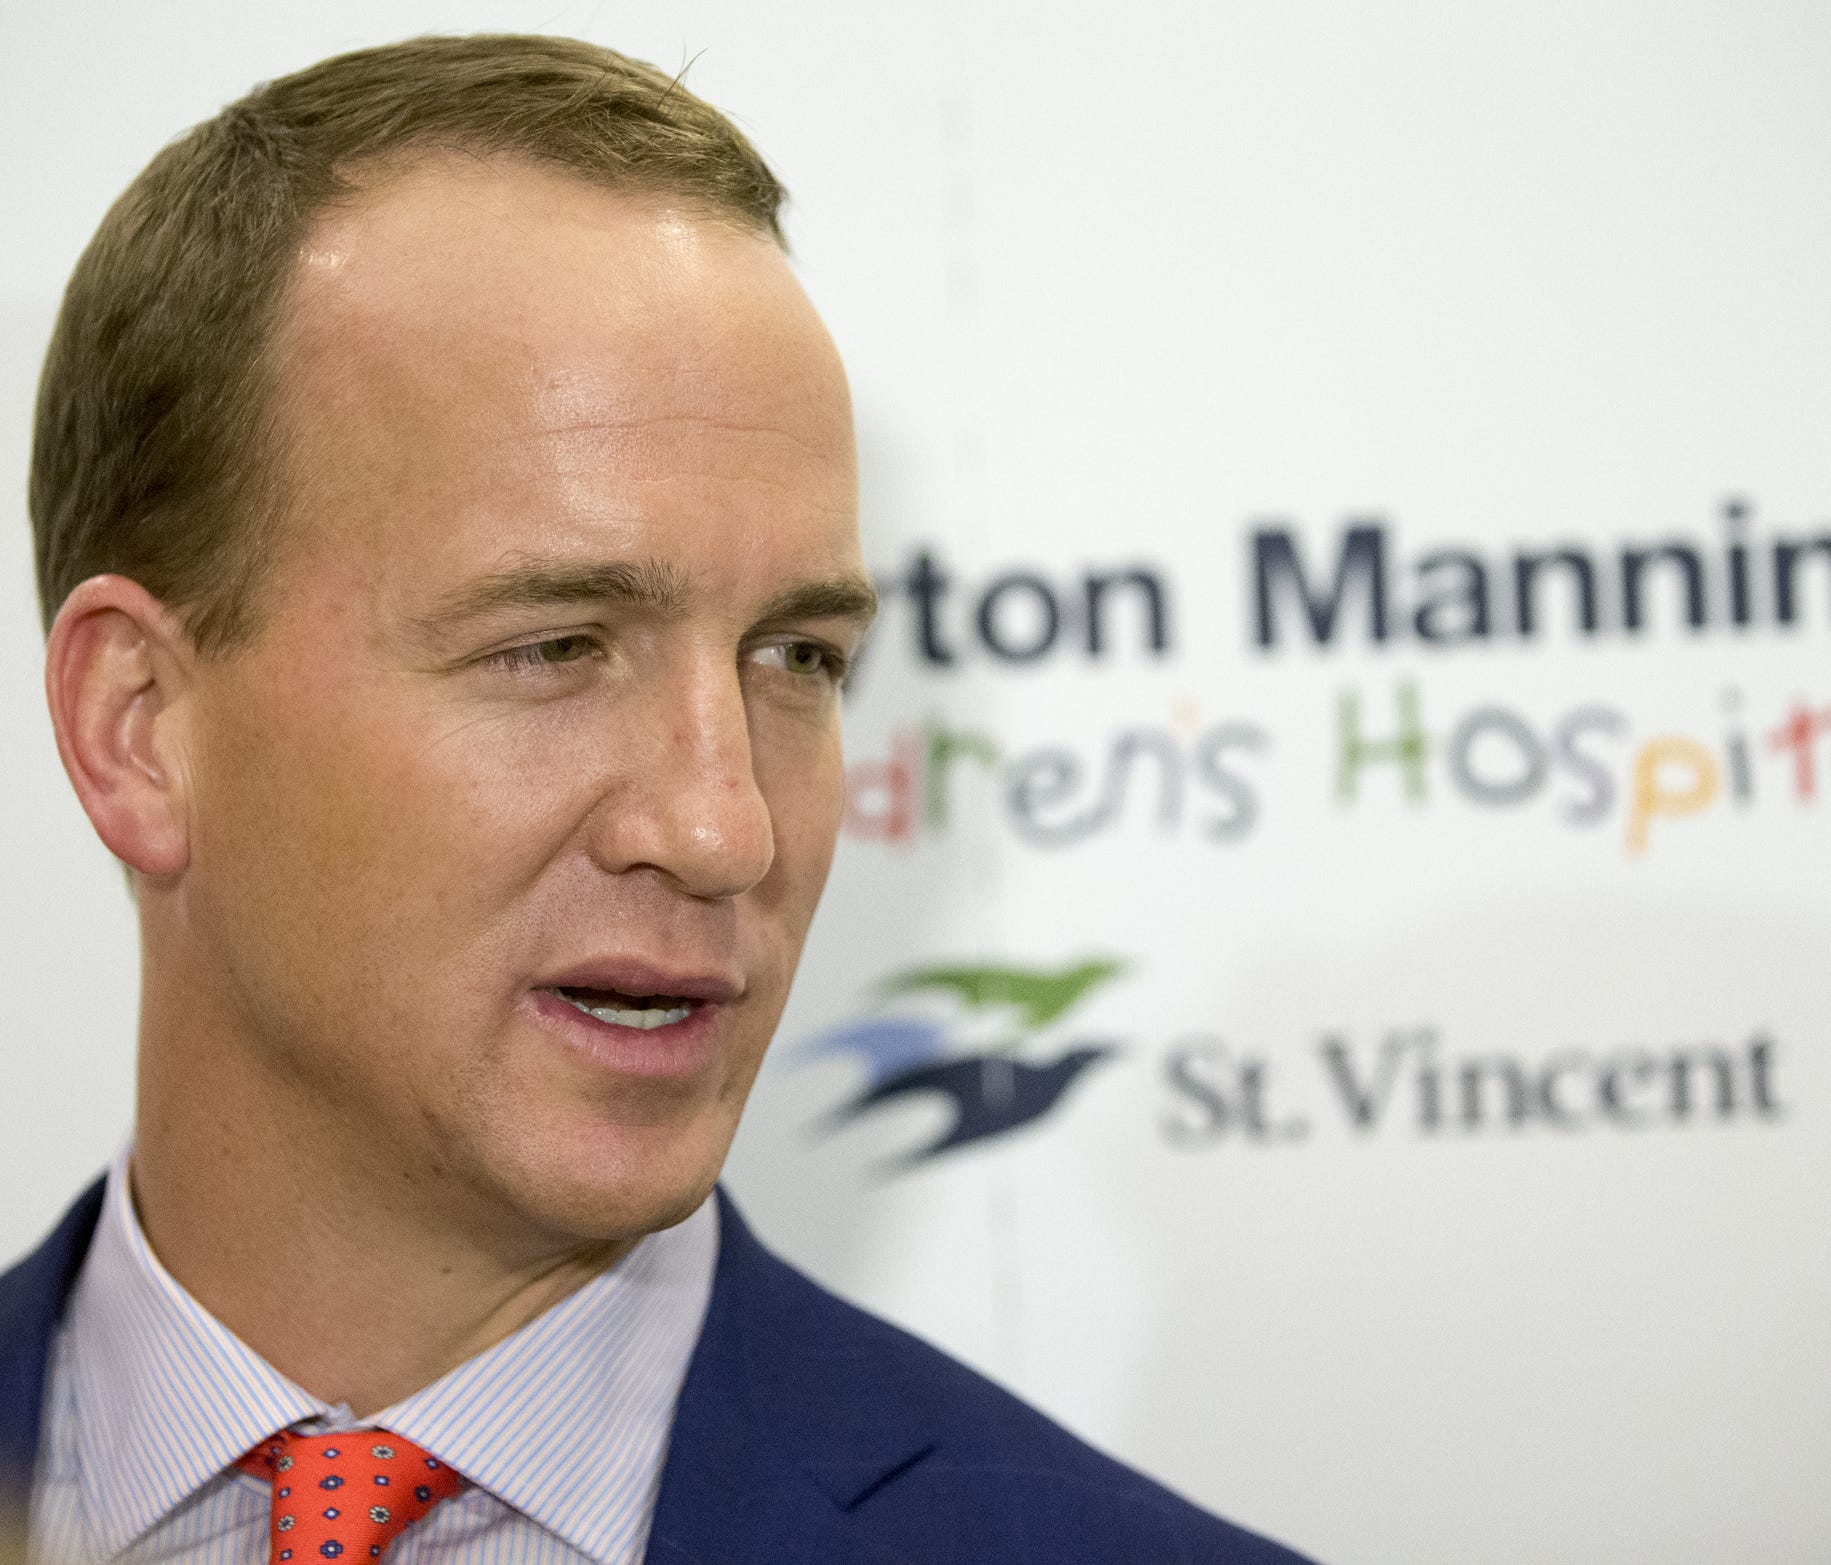 Peyton Manning talks with media before the evening's Peyton Manning Children's Hospital at St. Vincent Fundraising Gala on May 8, 2015.